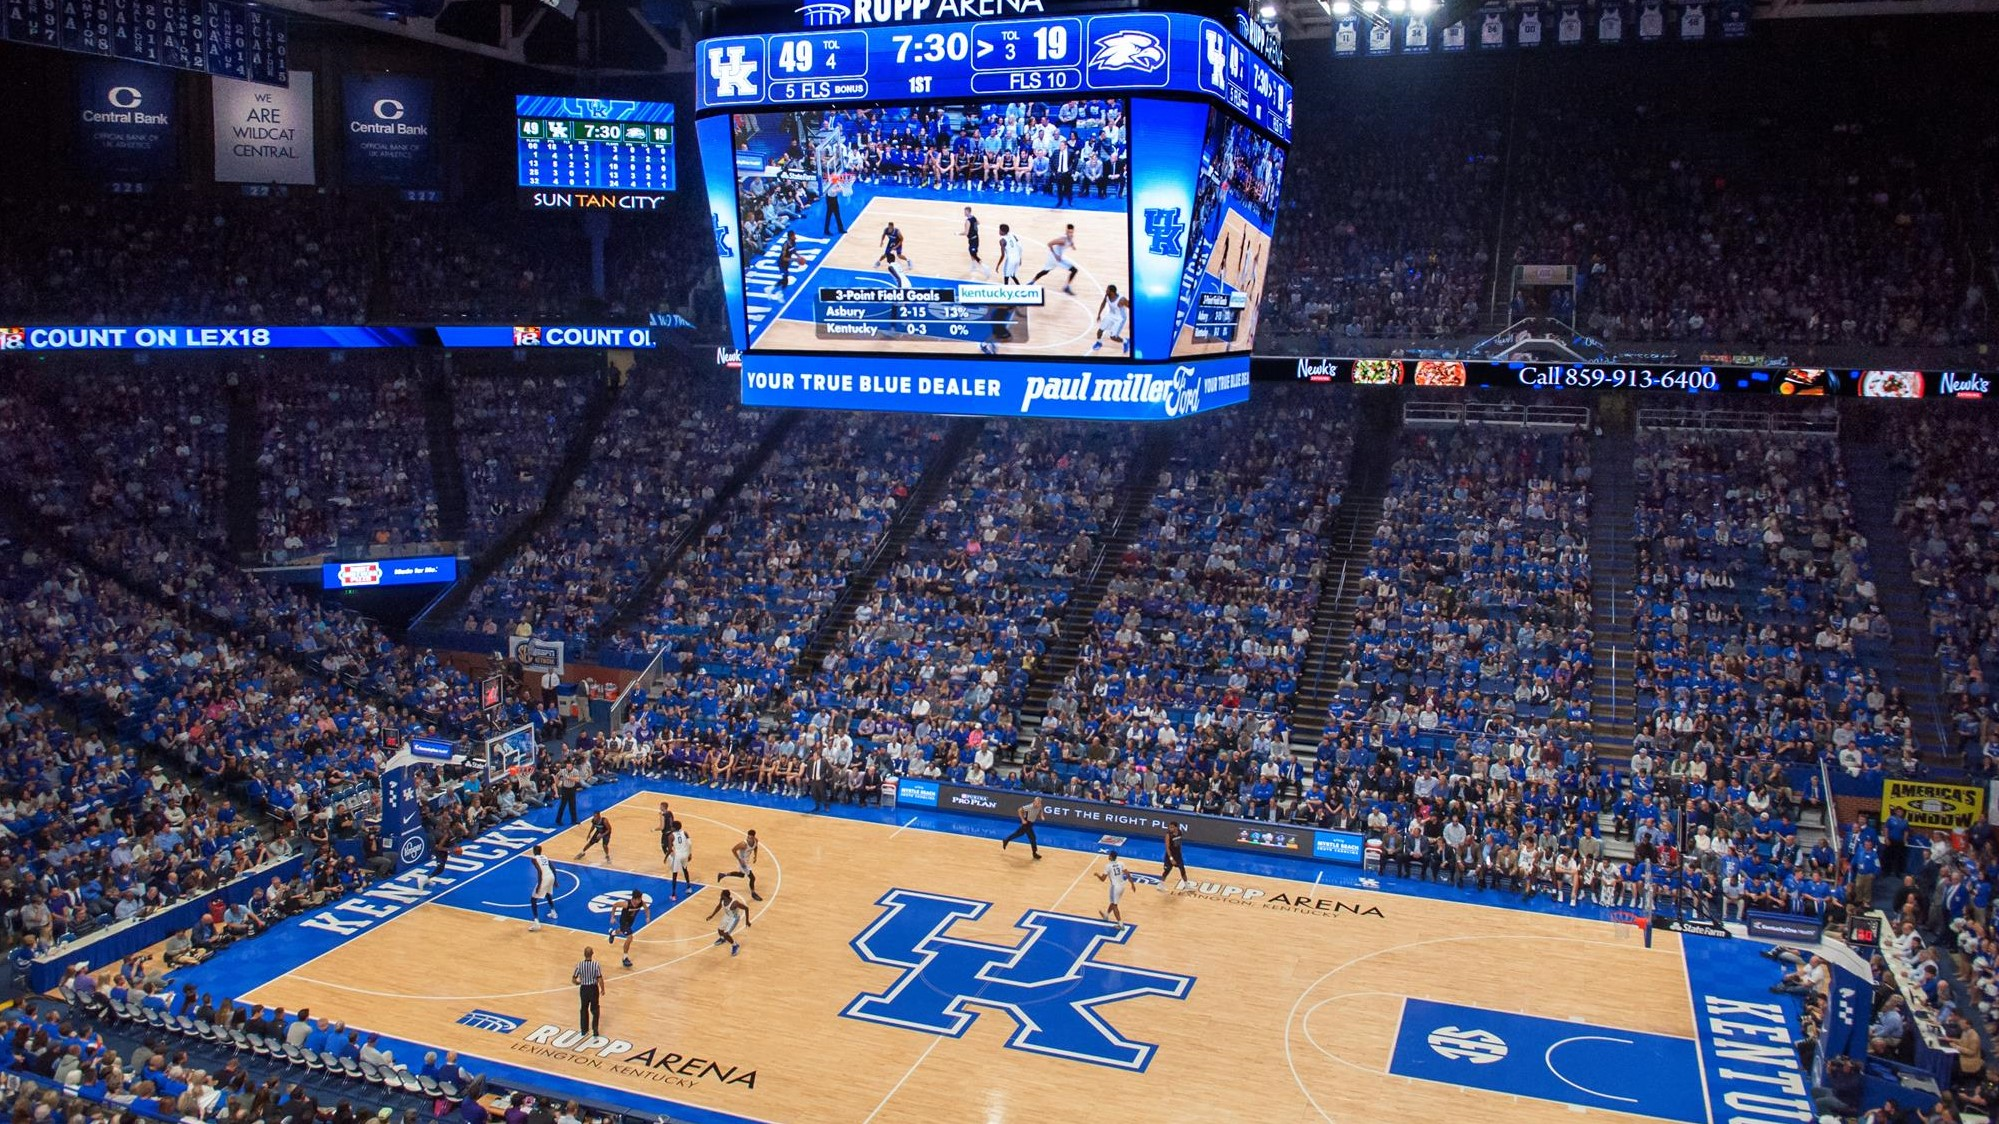 Ticket Security and Mobile Ticketing Reminders for Kansas Game